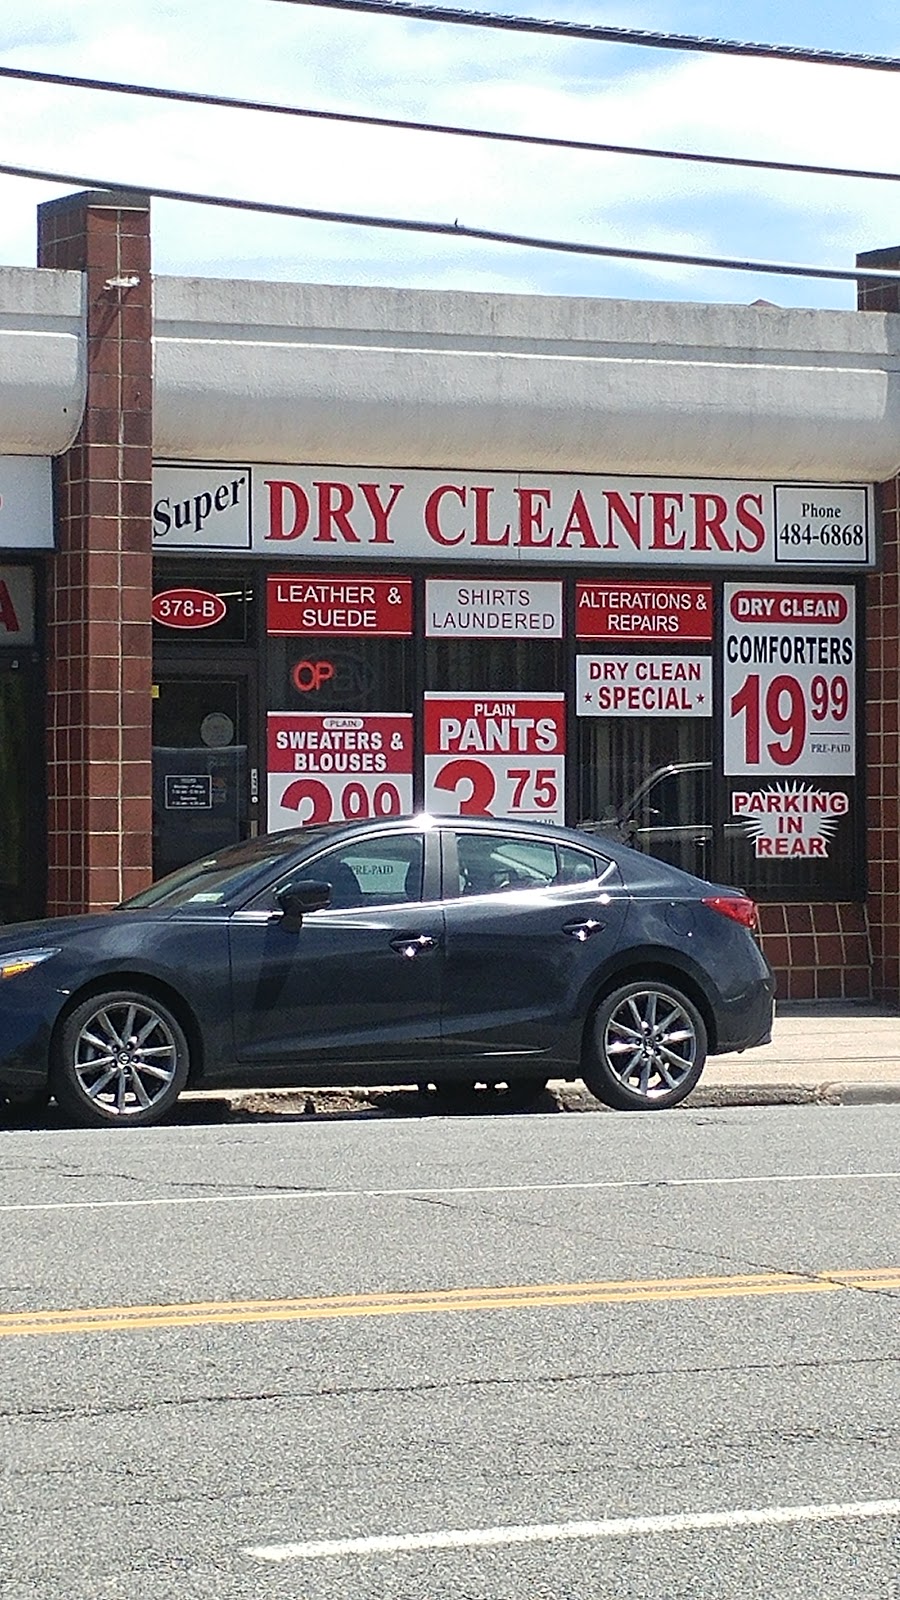 Super Dry Cleaners | 378B Willis Ave, Roslyn Heights, NY 11577 | Phone: (516) 484-6868